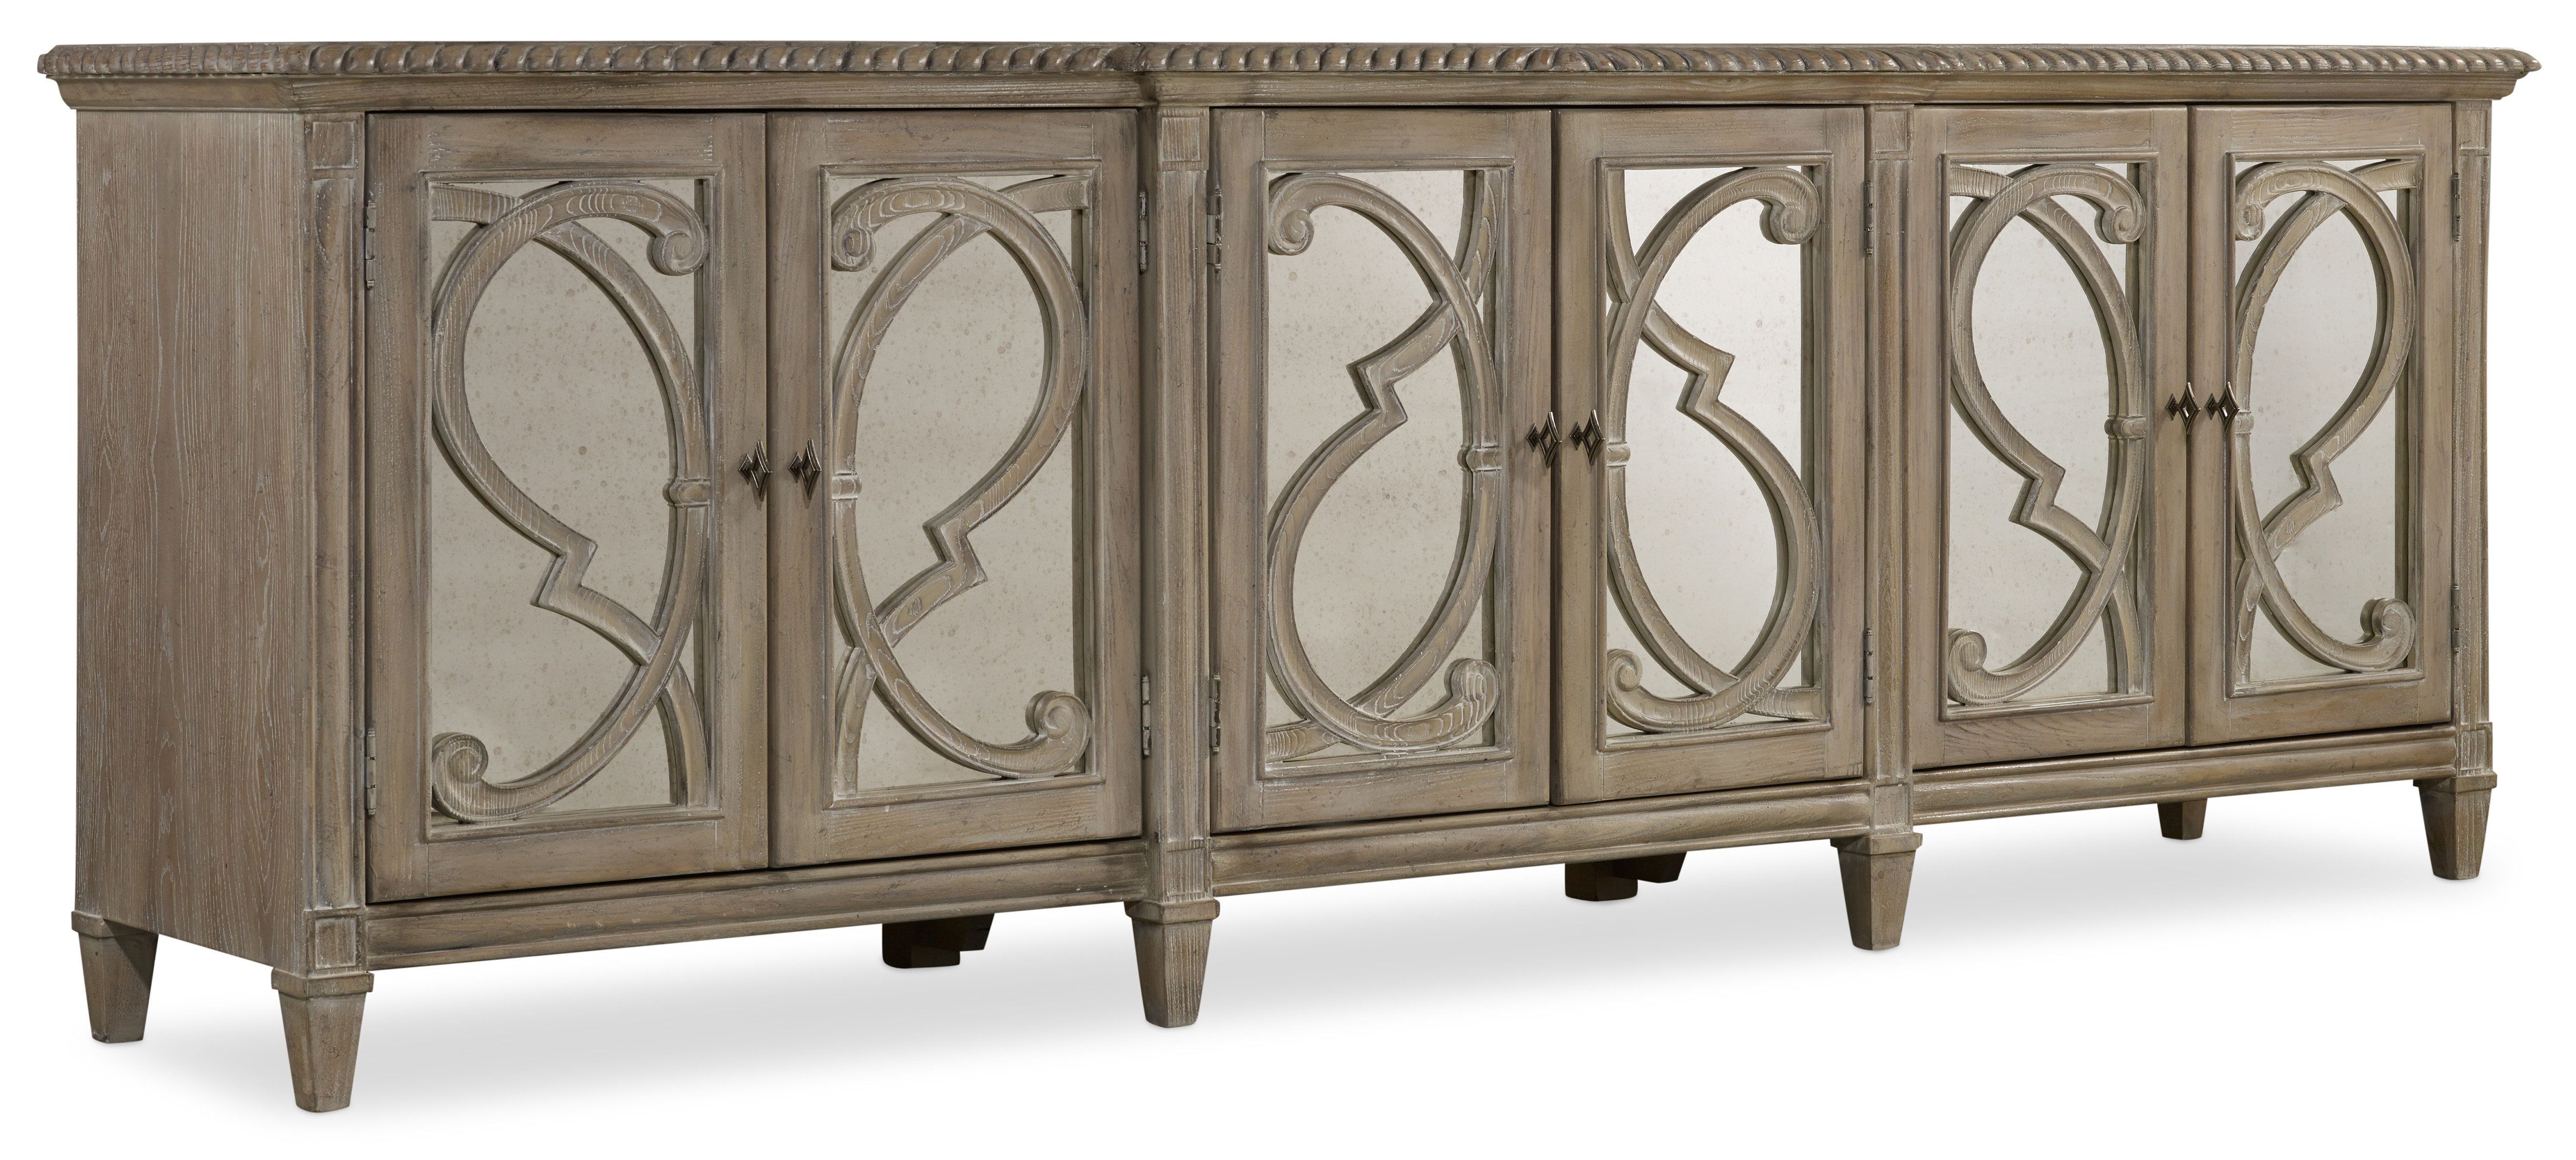 Sideboards & Buffet Tables | Joss & Main Inside Most Recent Armelle Sideboards (View 20 of 20)